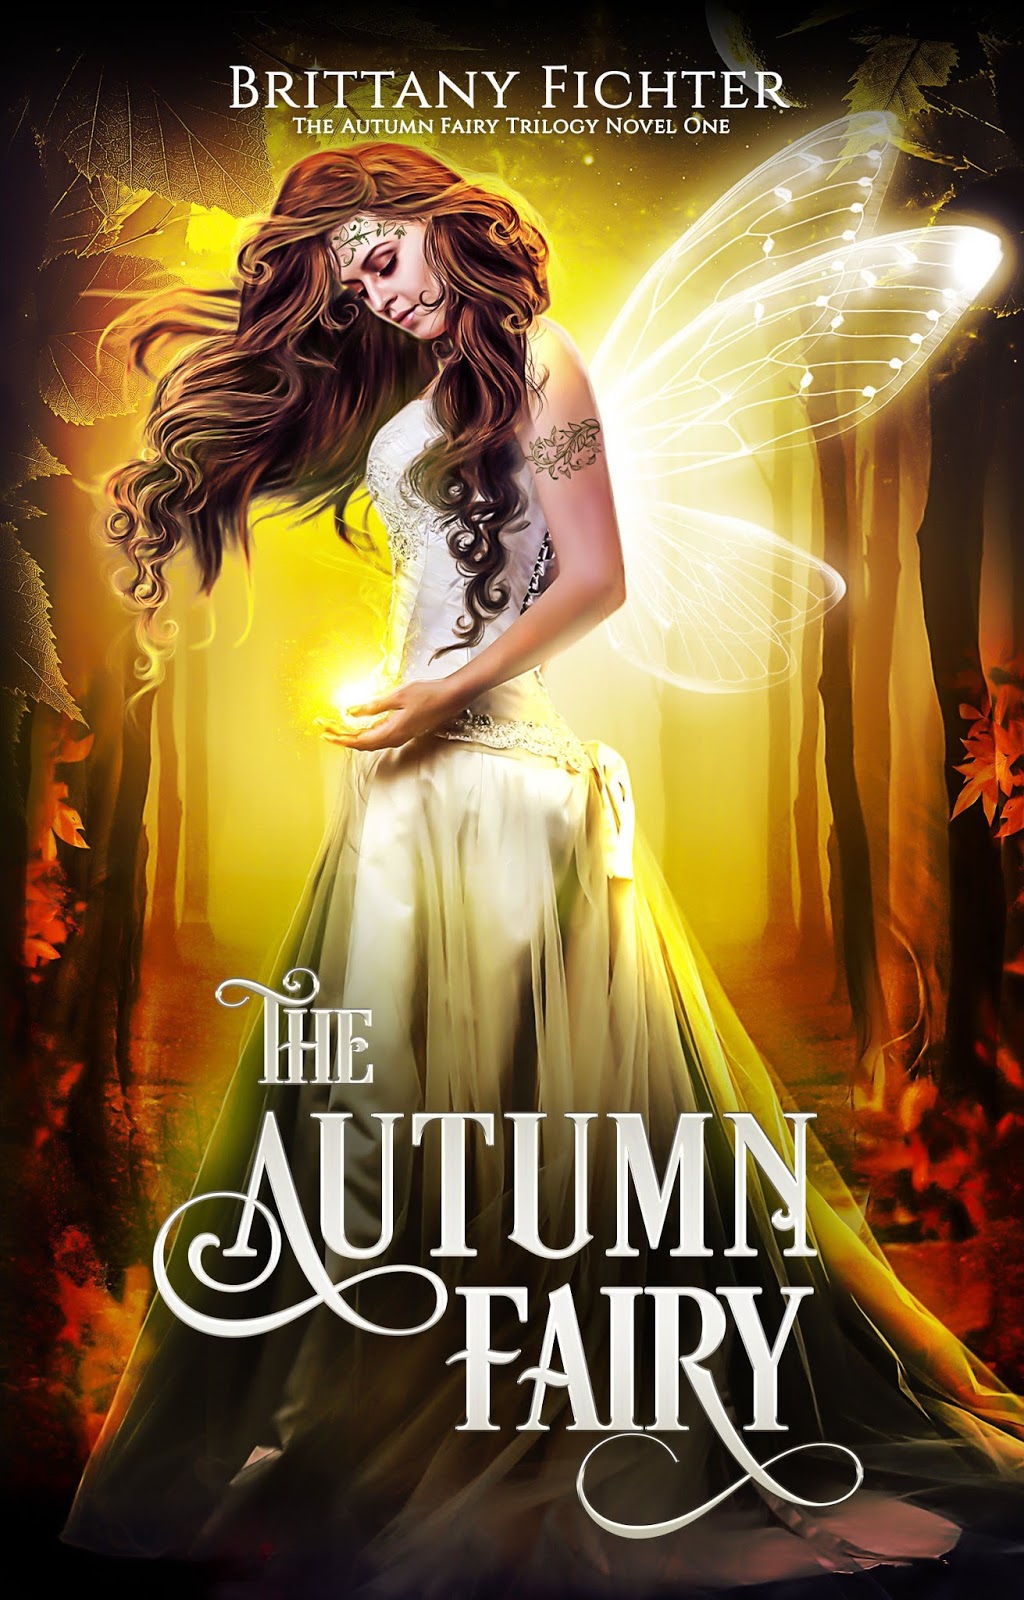 Review: The Autumn Fairy